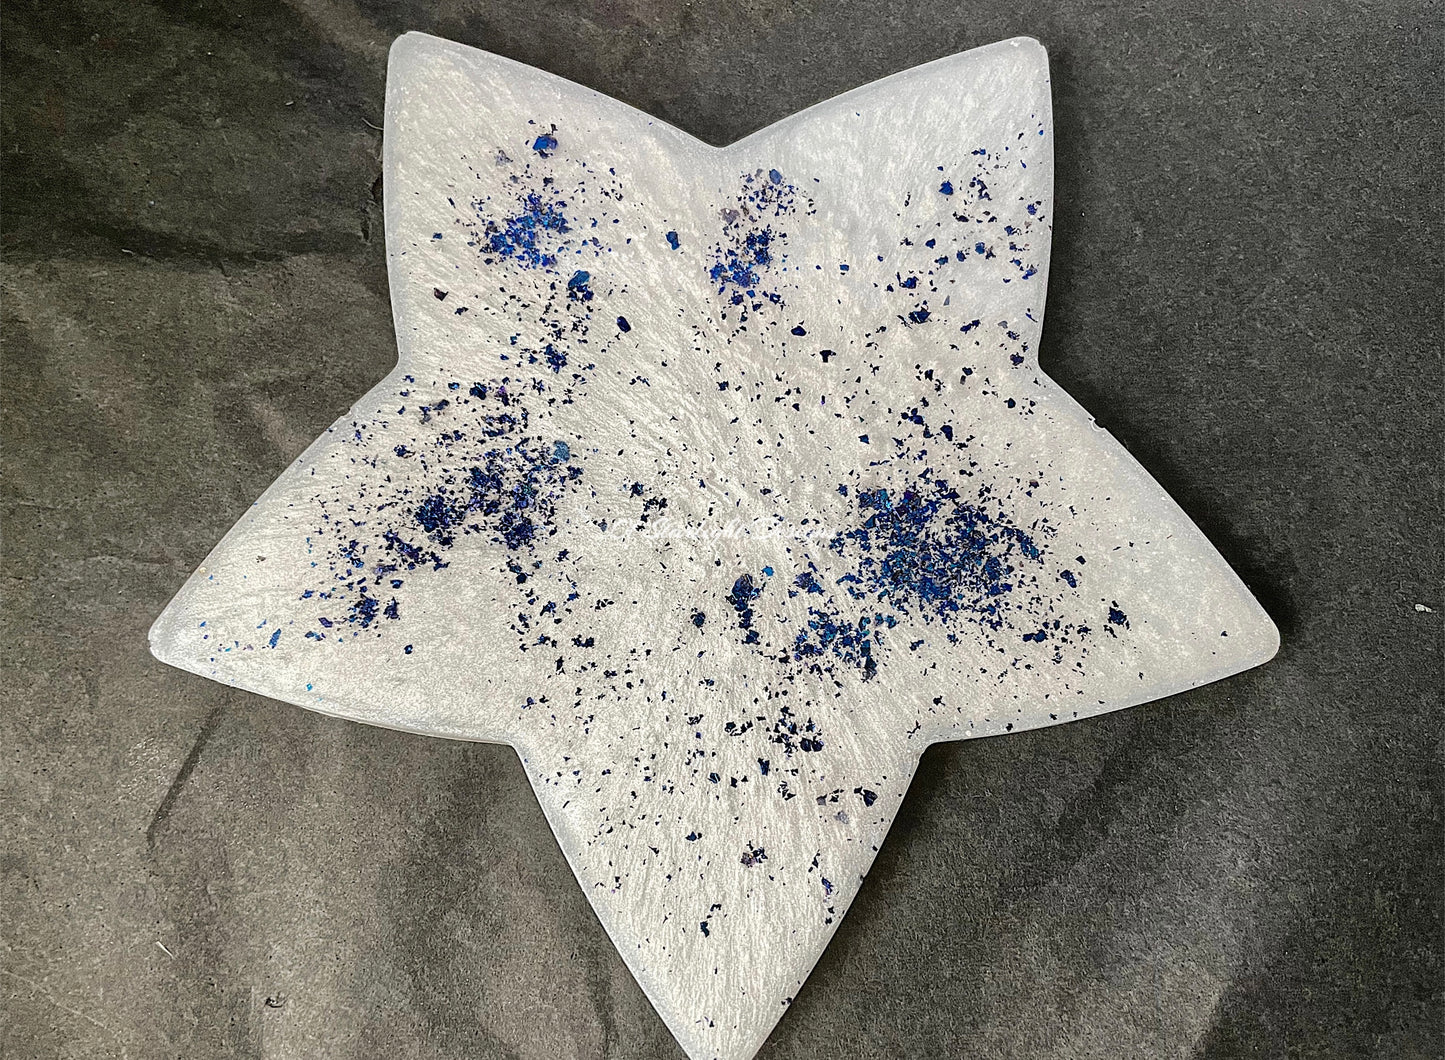 Two-Toned Star Resin Coasters